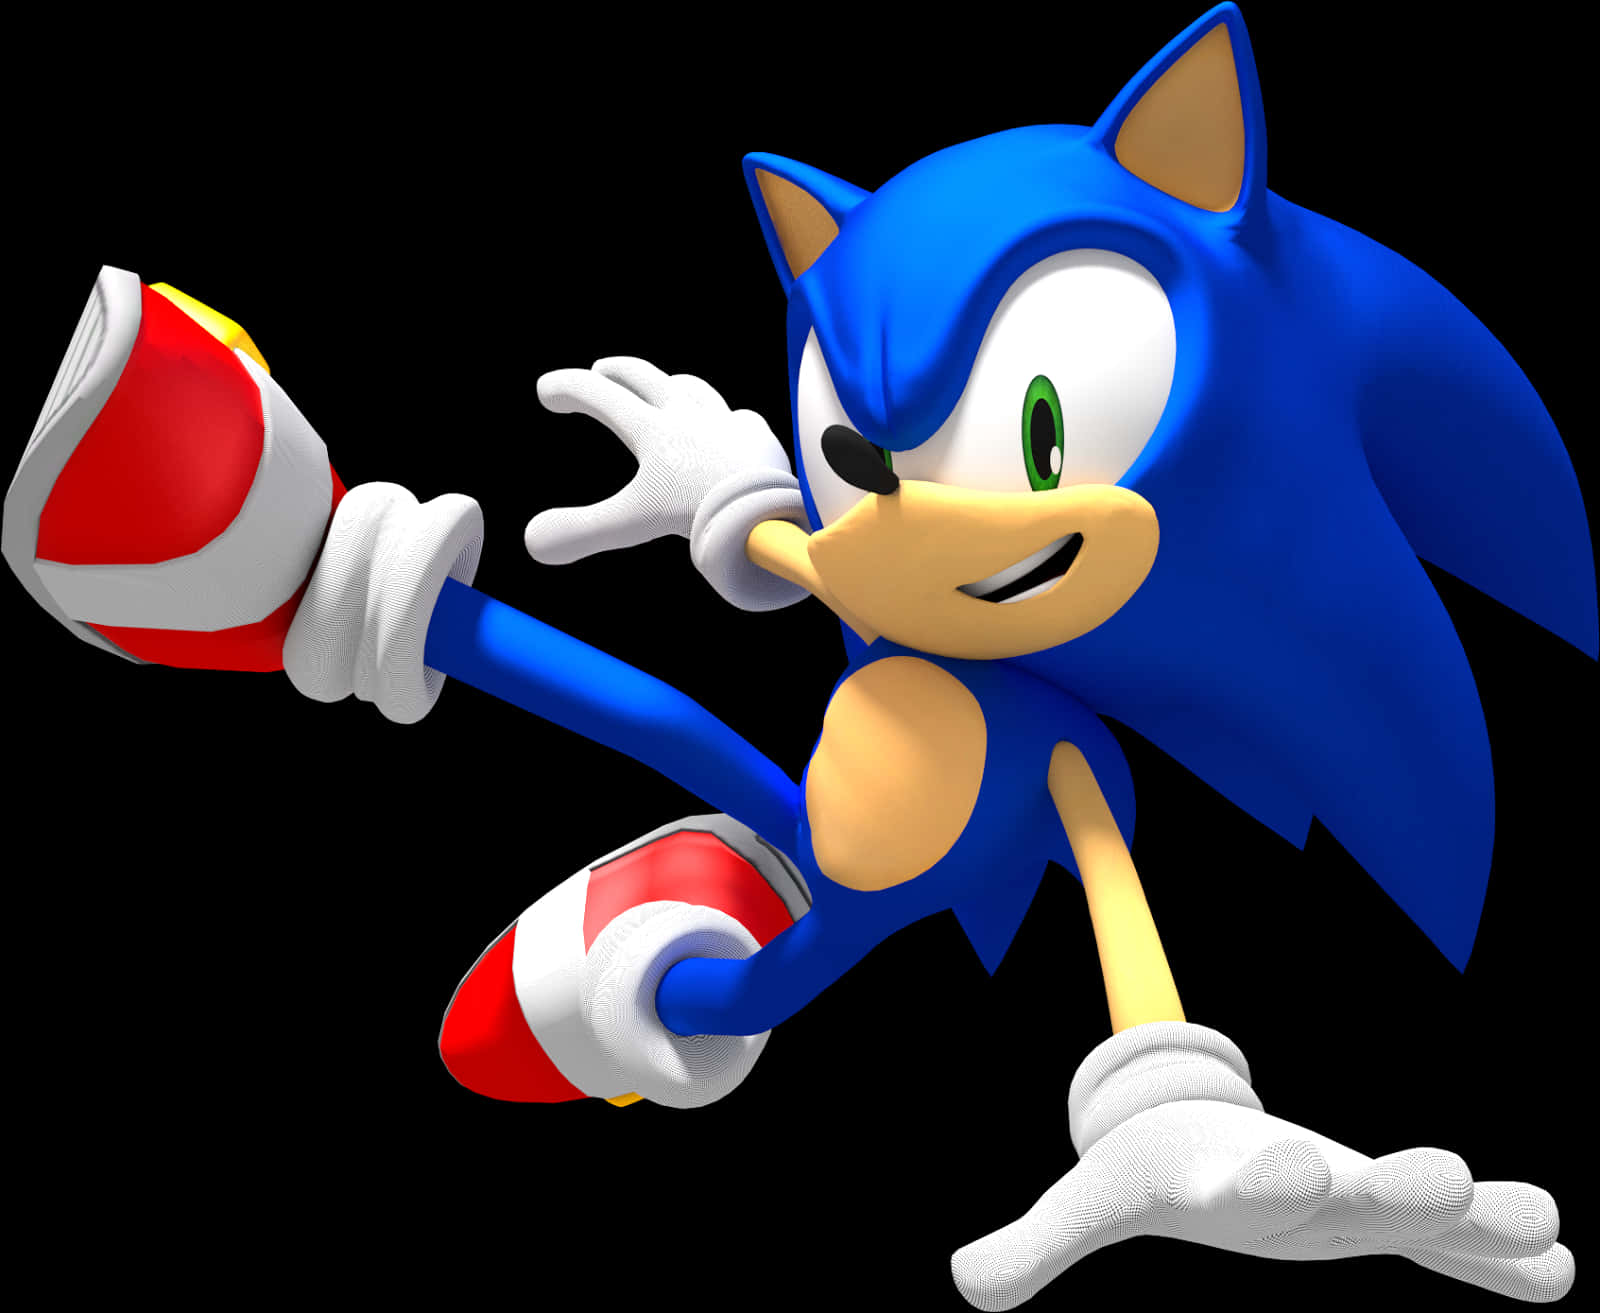 Download Sonic The Hedgehog Running Pose | Wallpapers.com